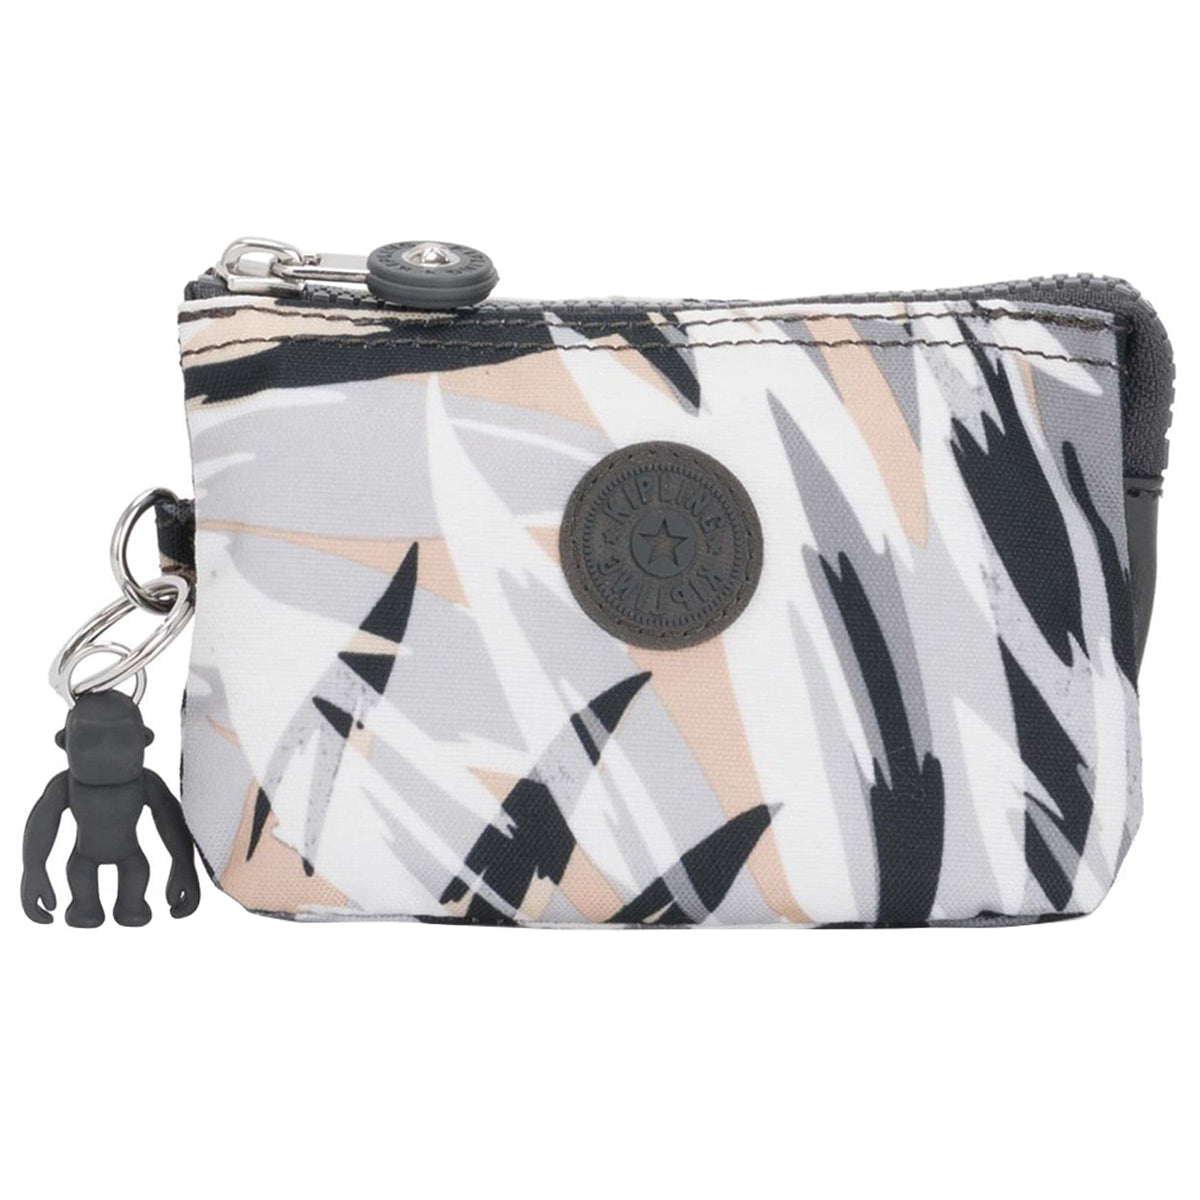 Kipling Creativity Small Printed Pouch